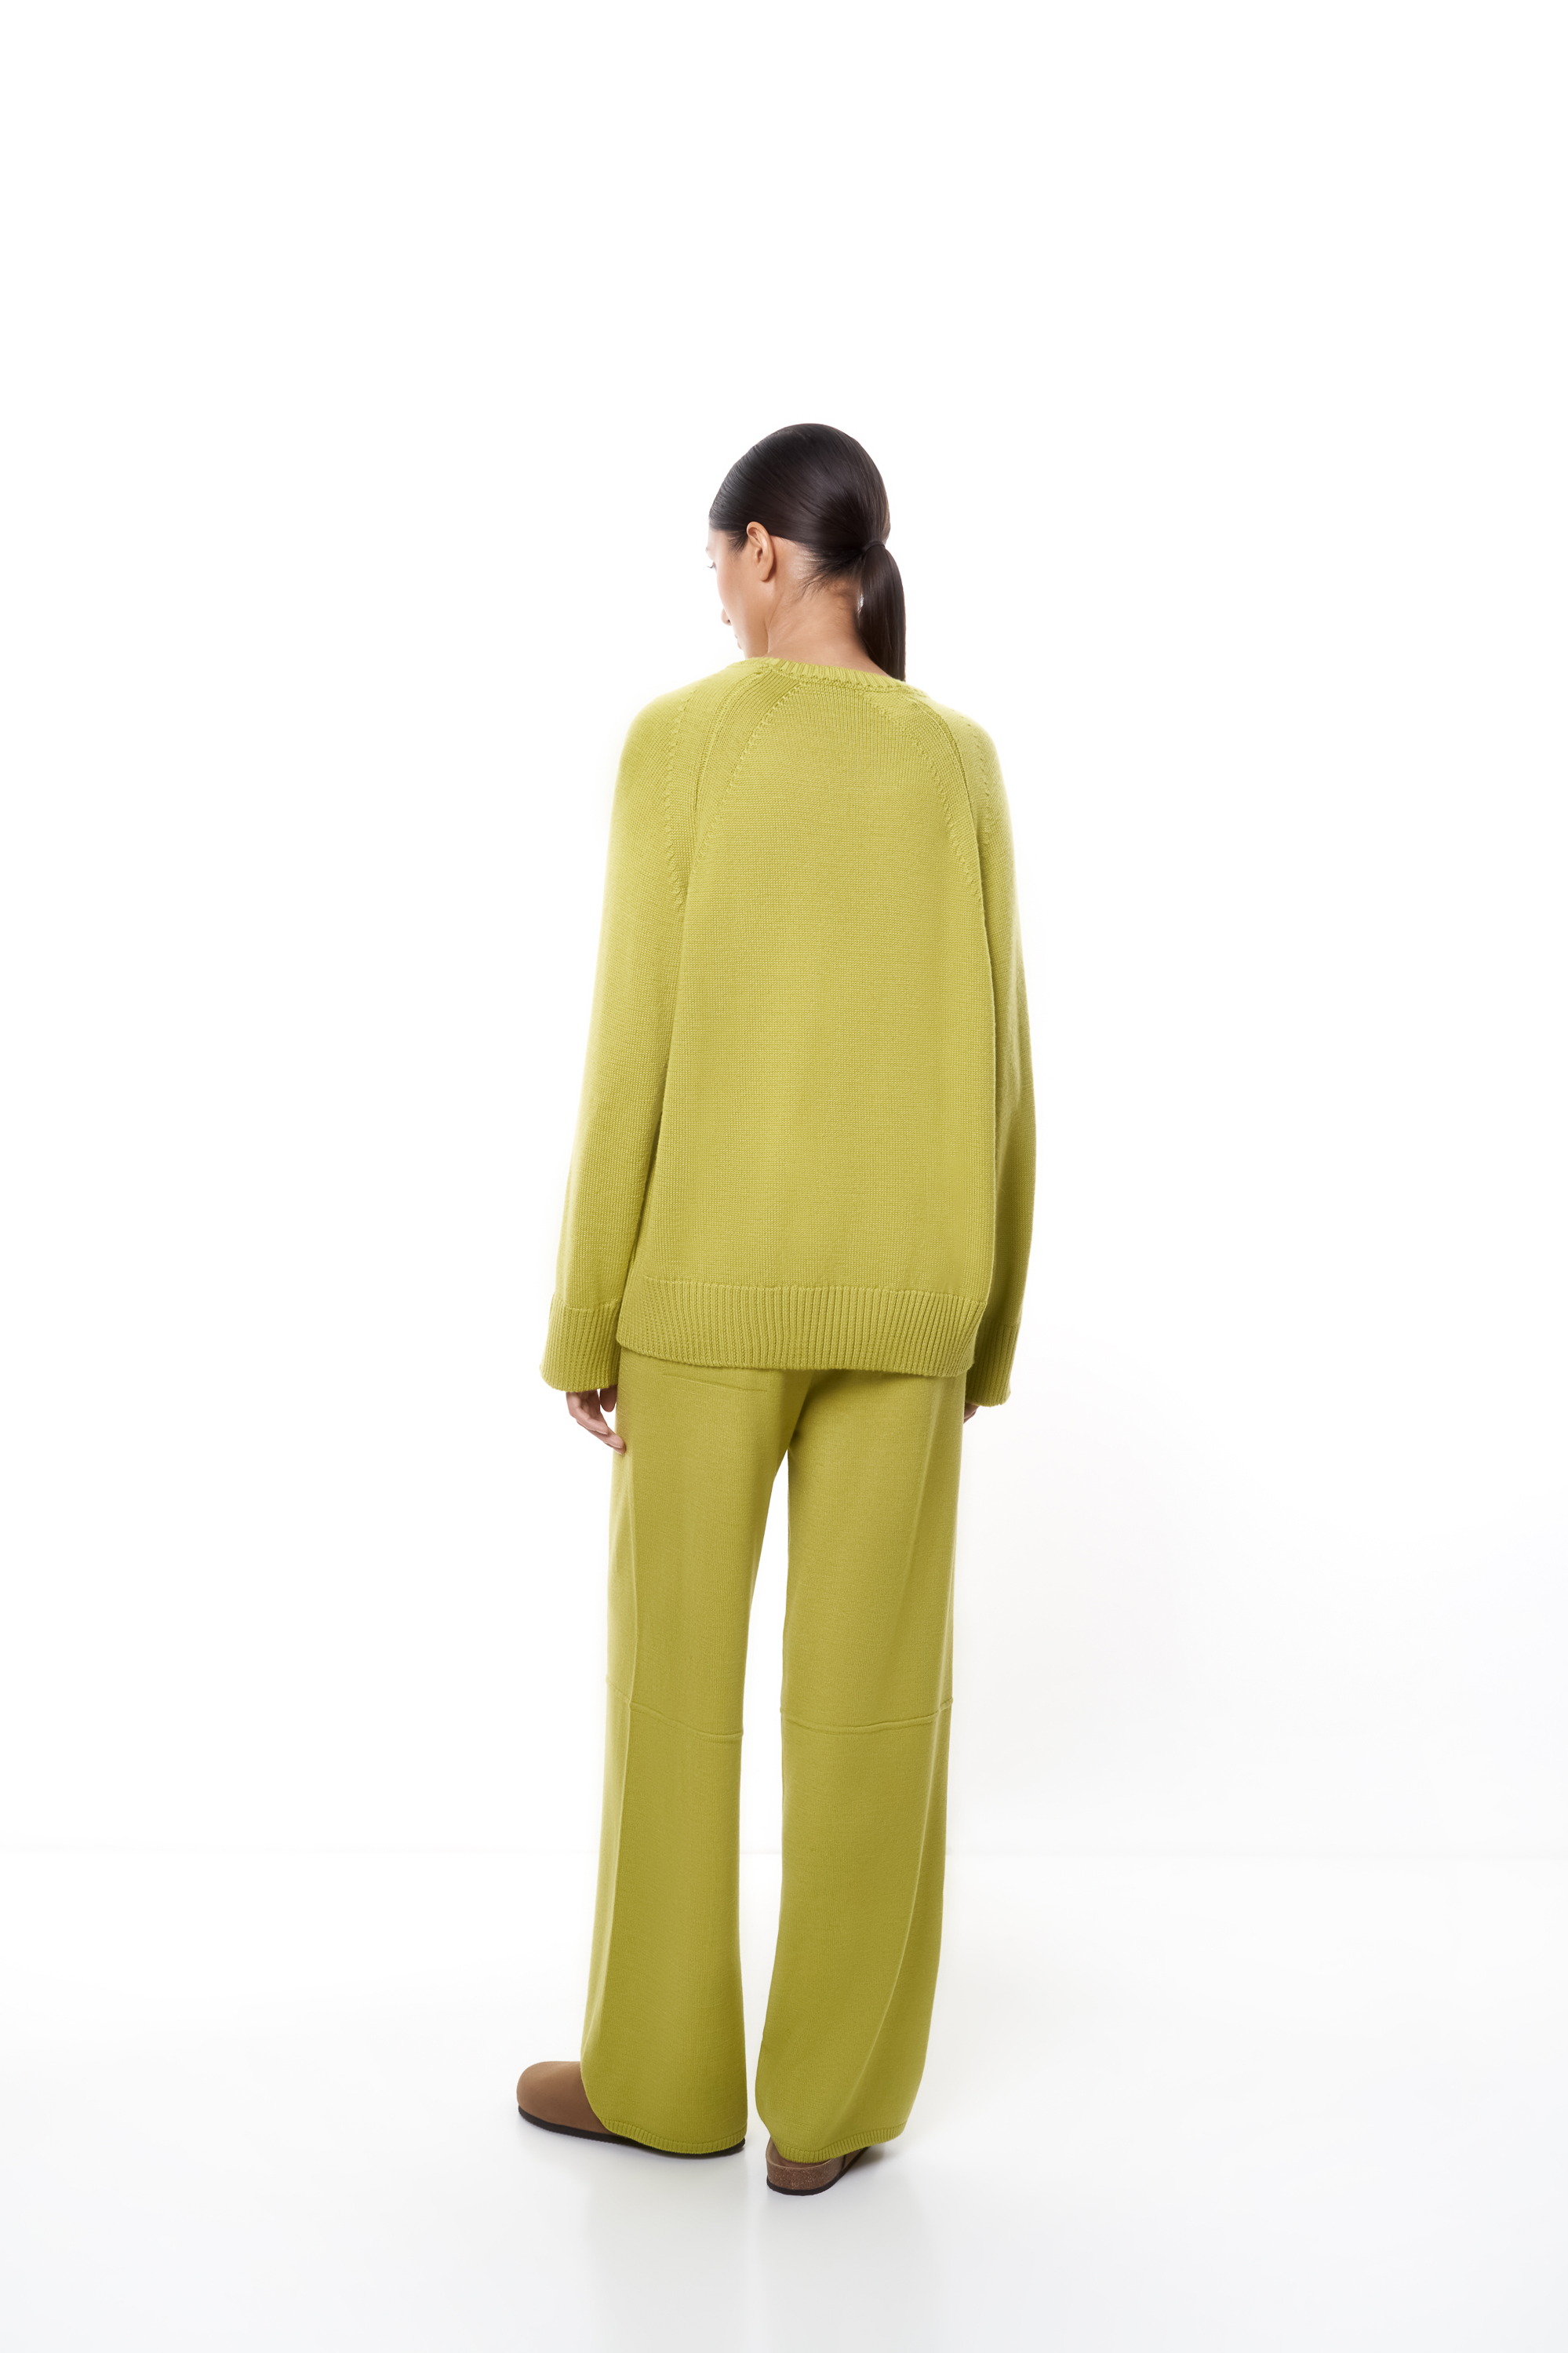 Trousers 4279-23 Yellow-Green from BRUSNiKA